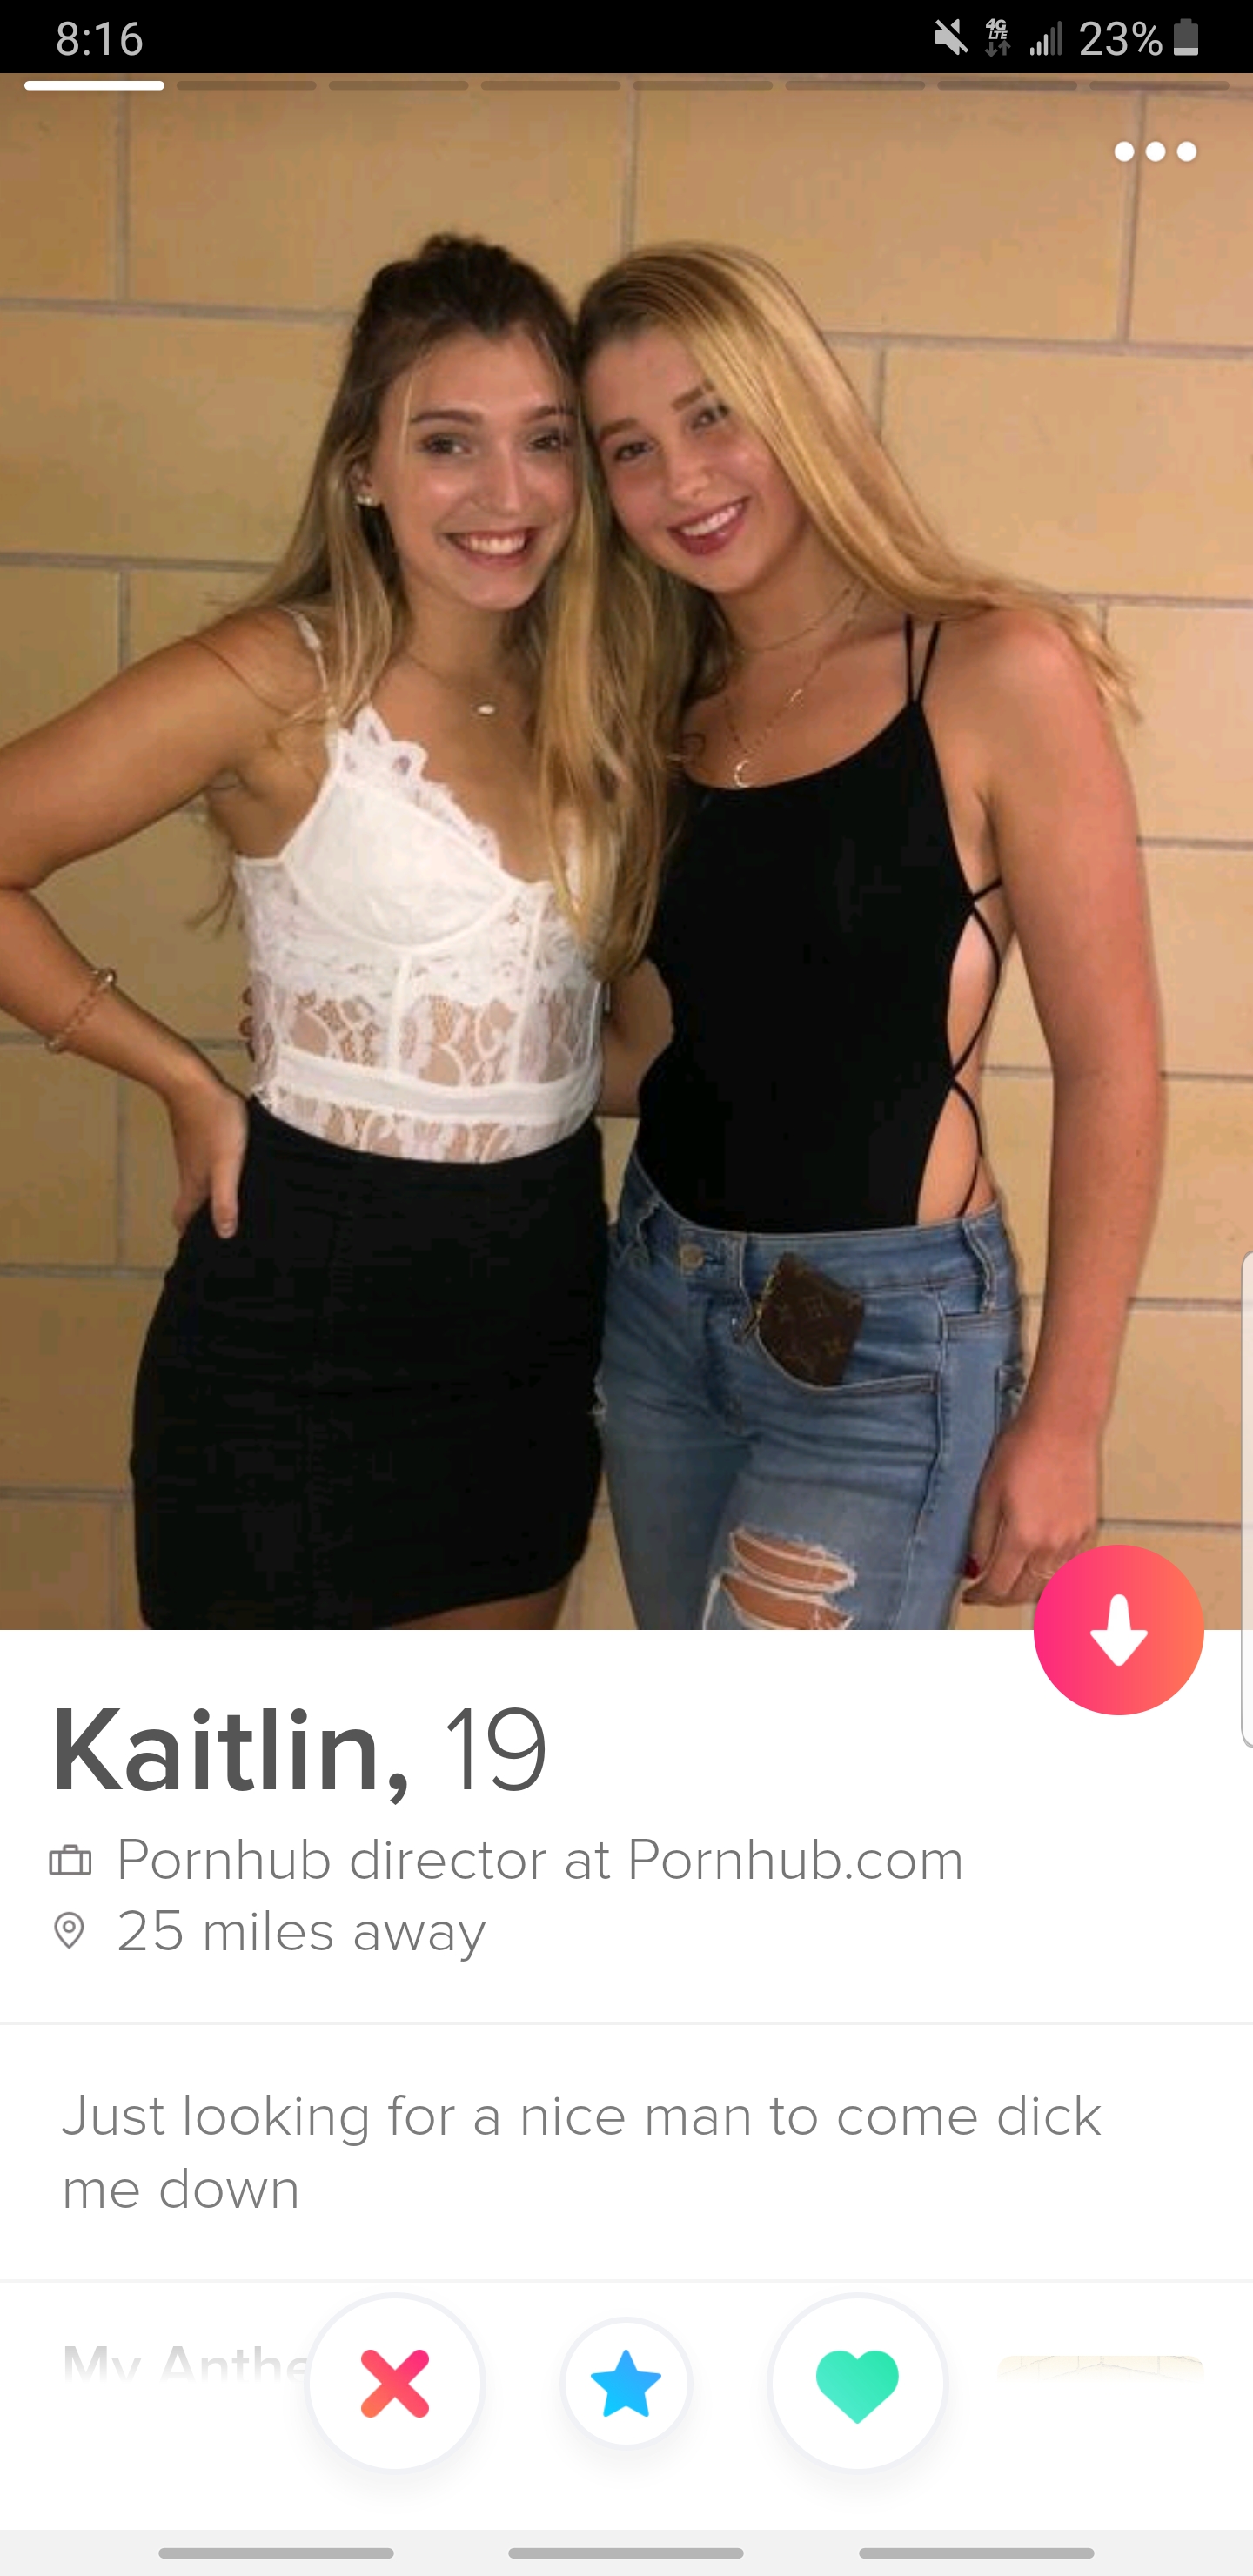 Shameless Tinder profile that says Kaitlin, 19 Pornhub director at Pornhub.com 25 miles away Just looking for a nice man to come dick me down X